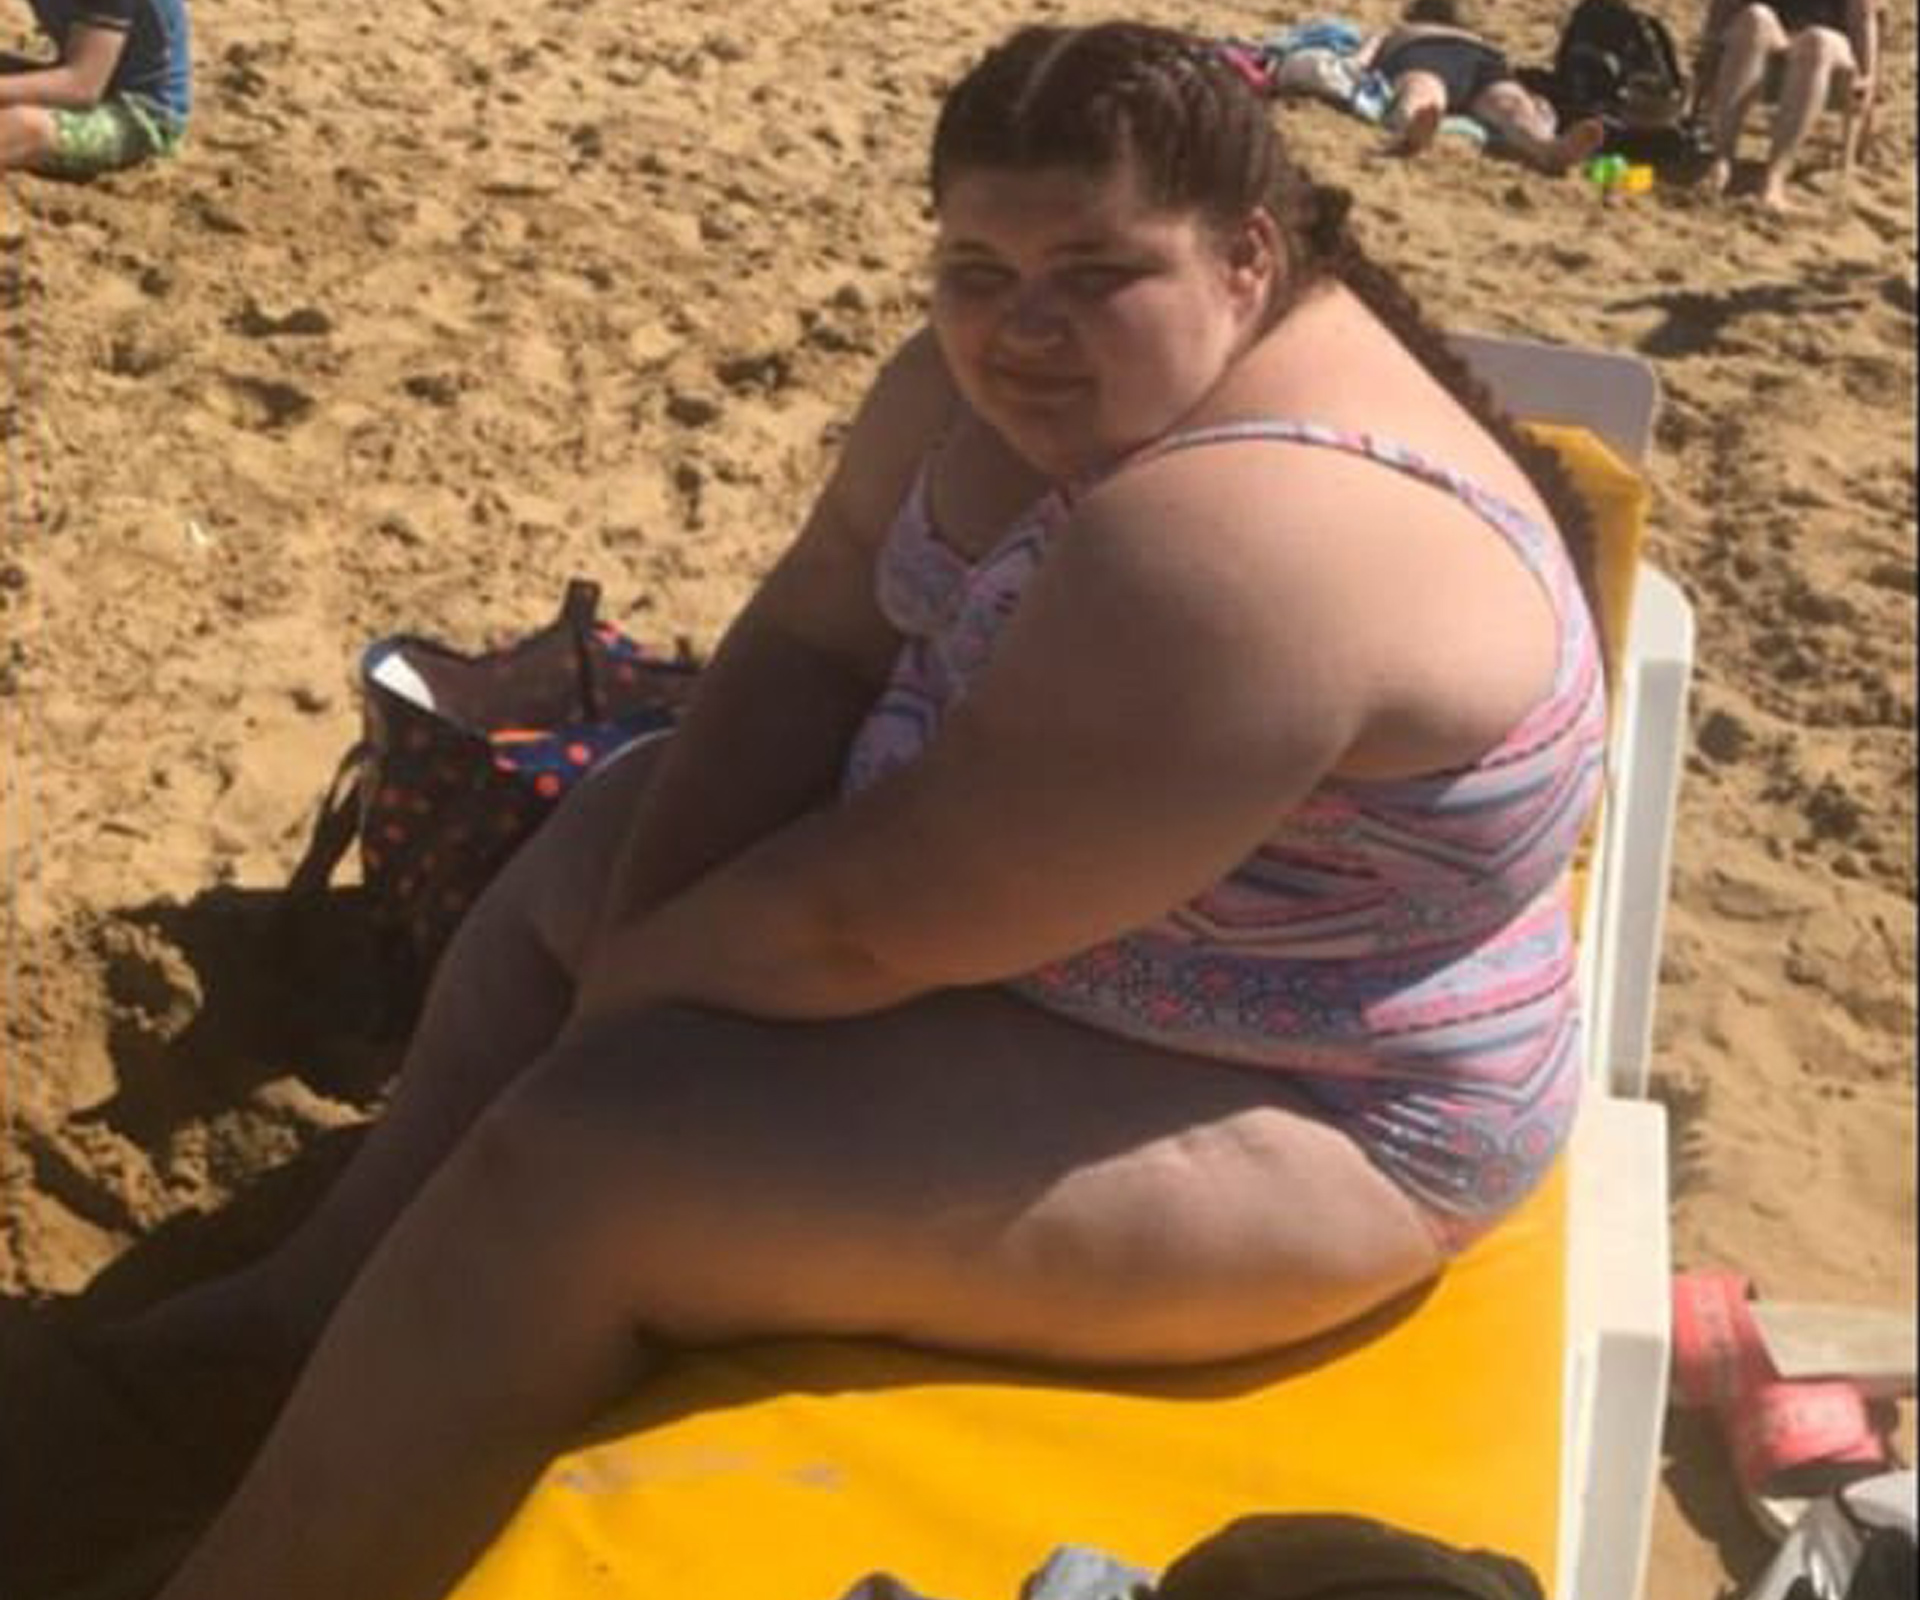 13-year-old hits back at body shaming bullies in the best possible way